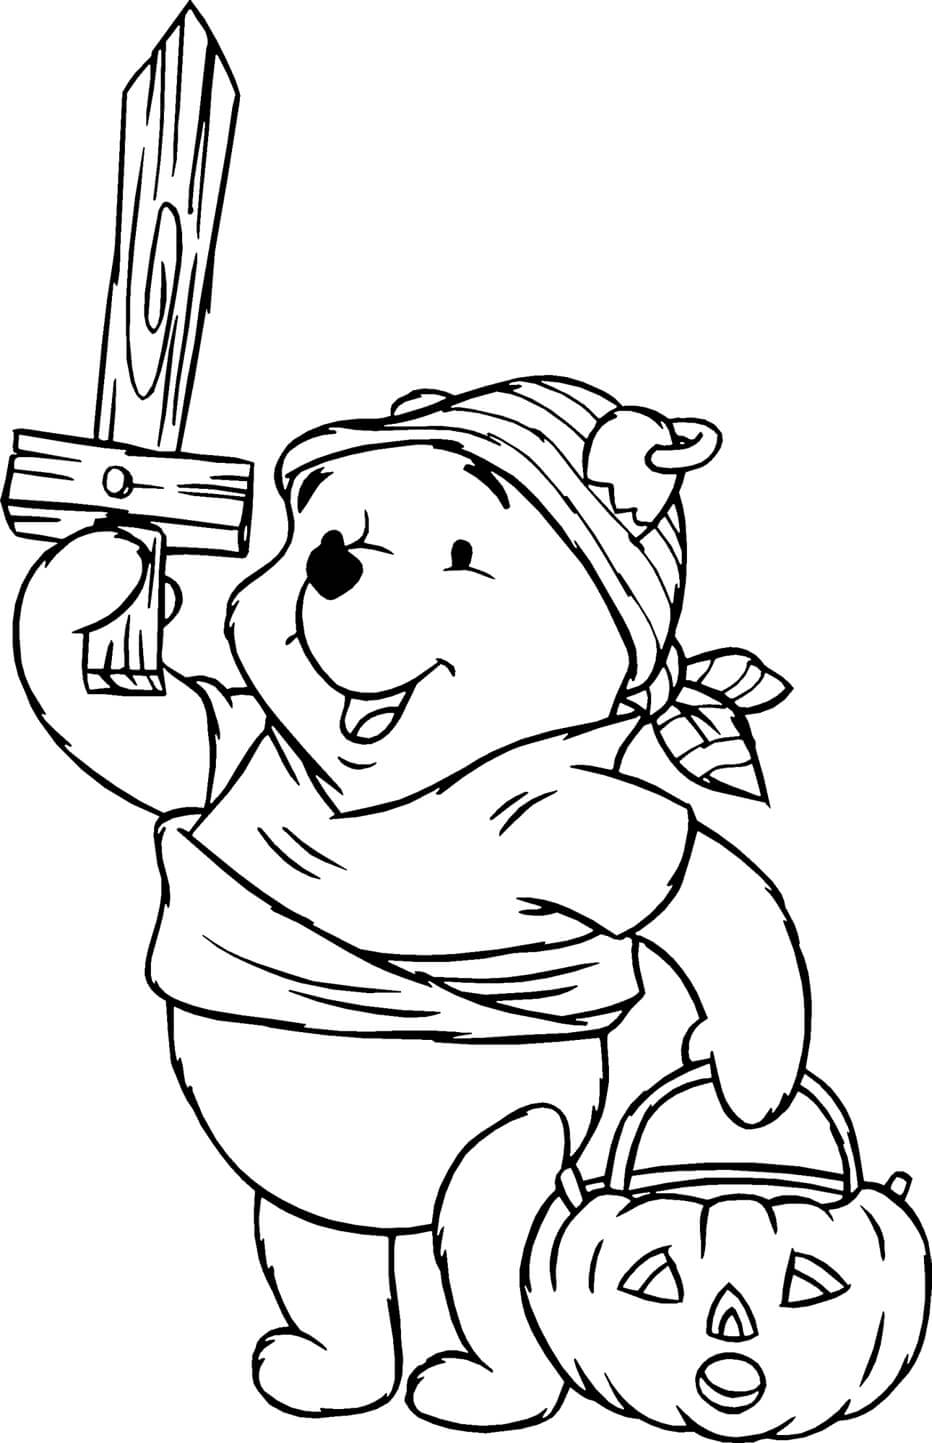 Halloween Winnie the Pooh Costume Coloring Page